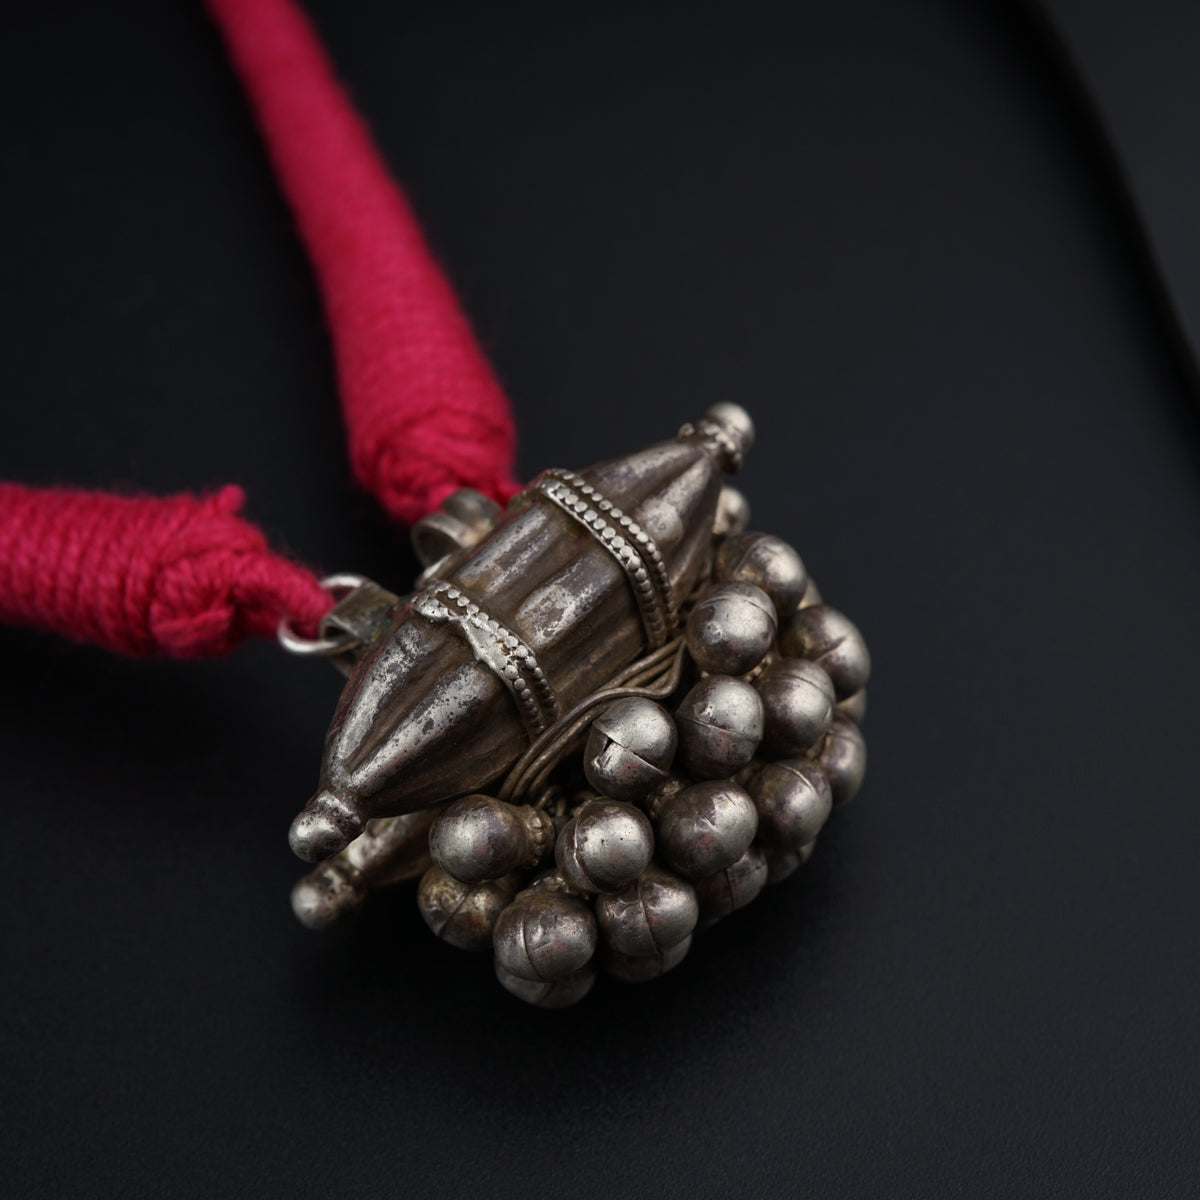 a silver object with a red cord on a black surface